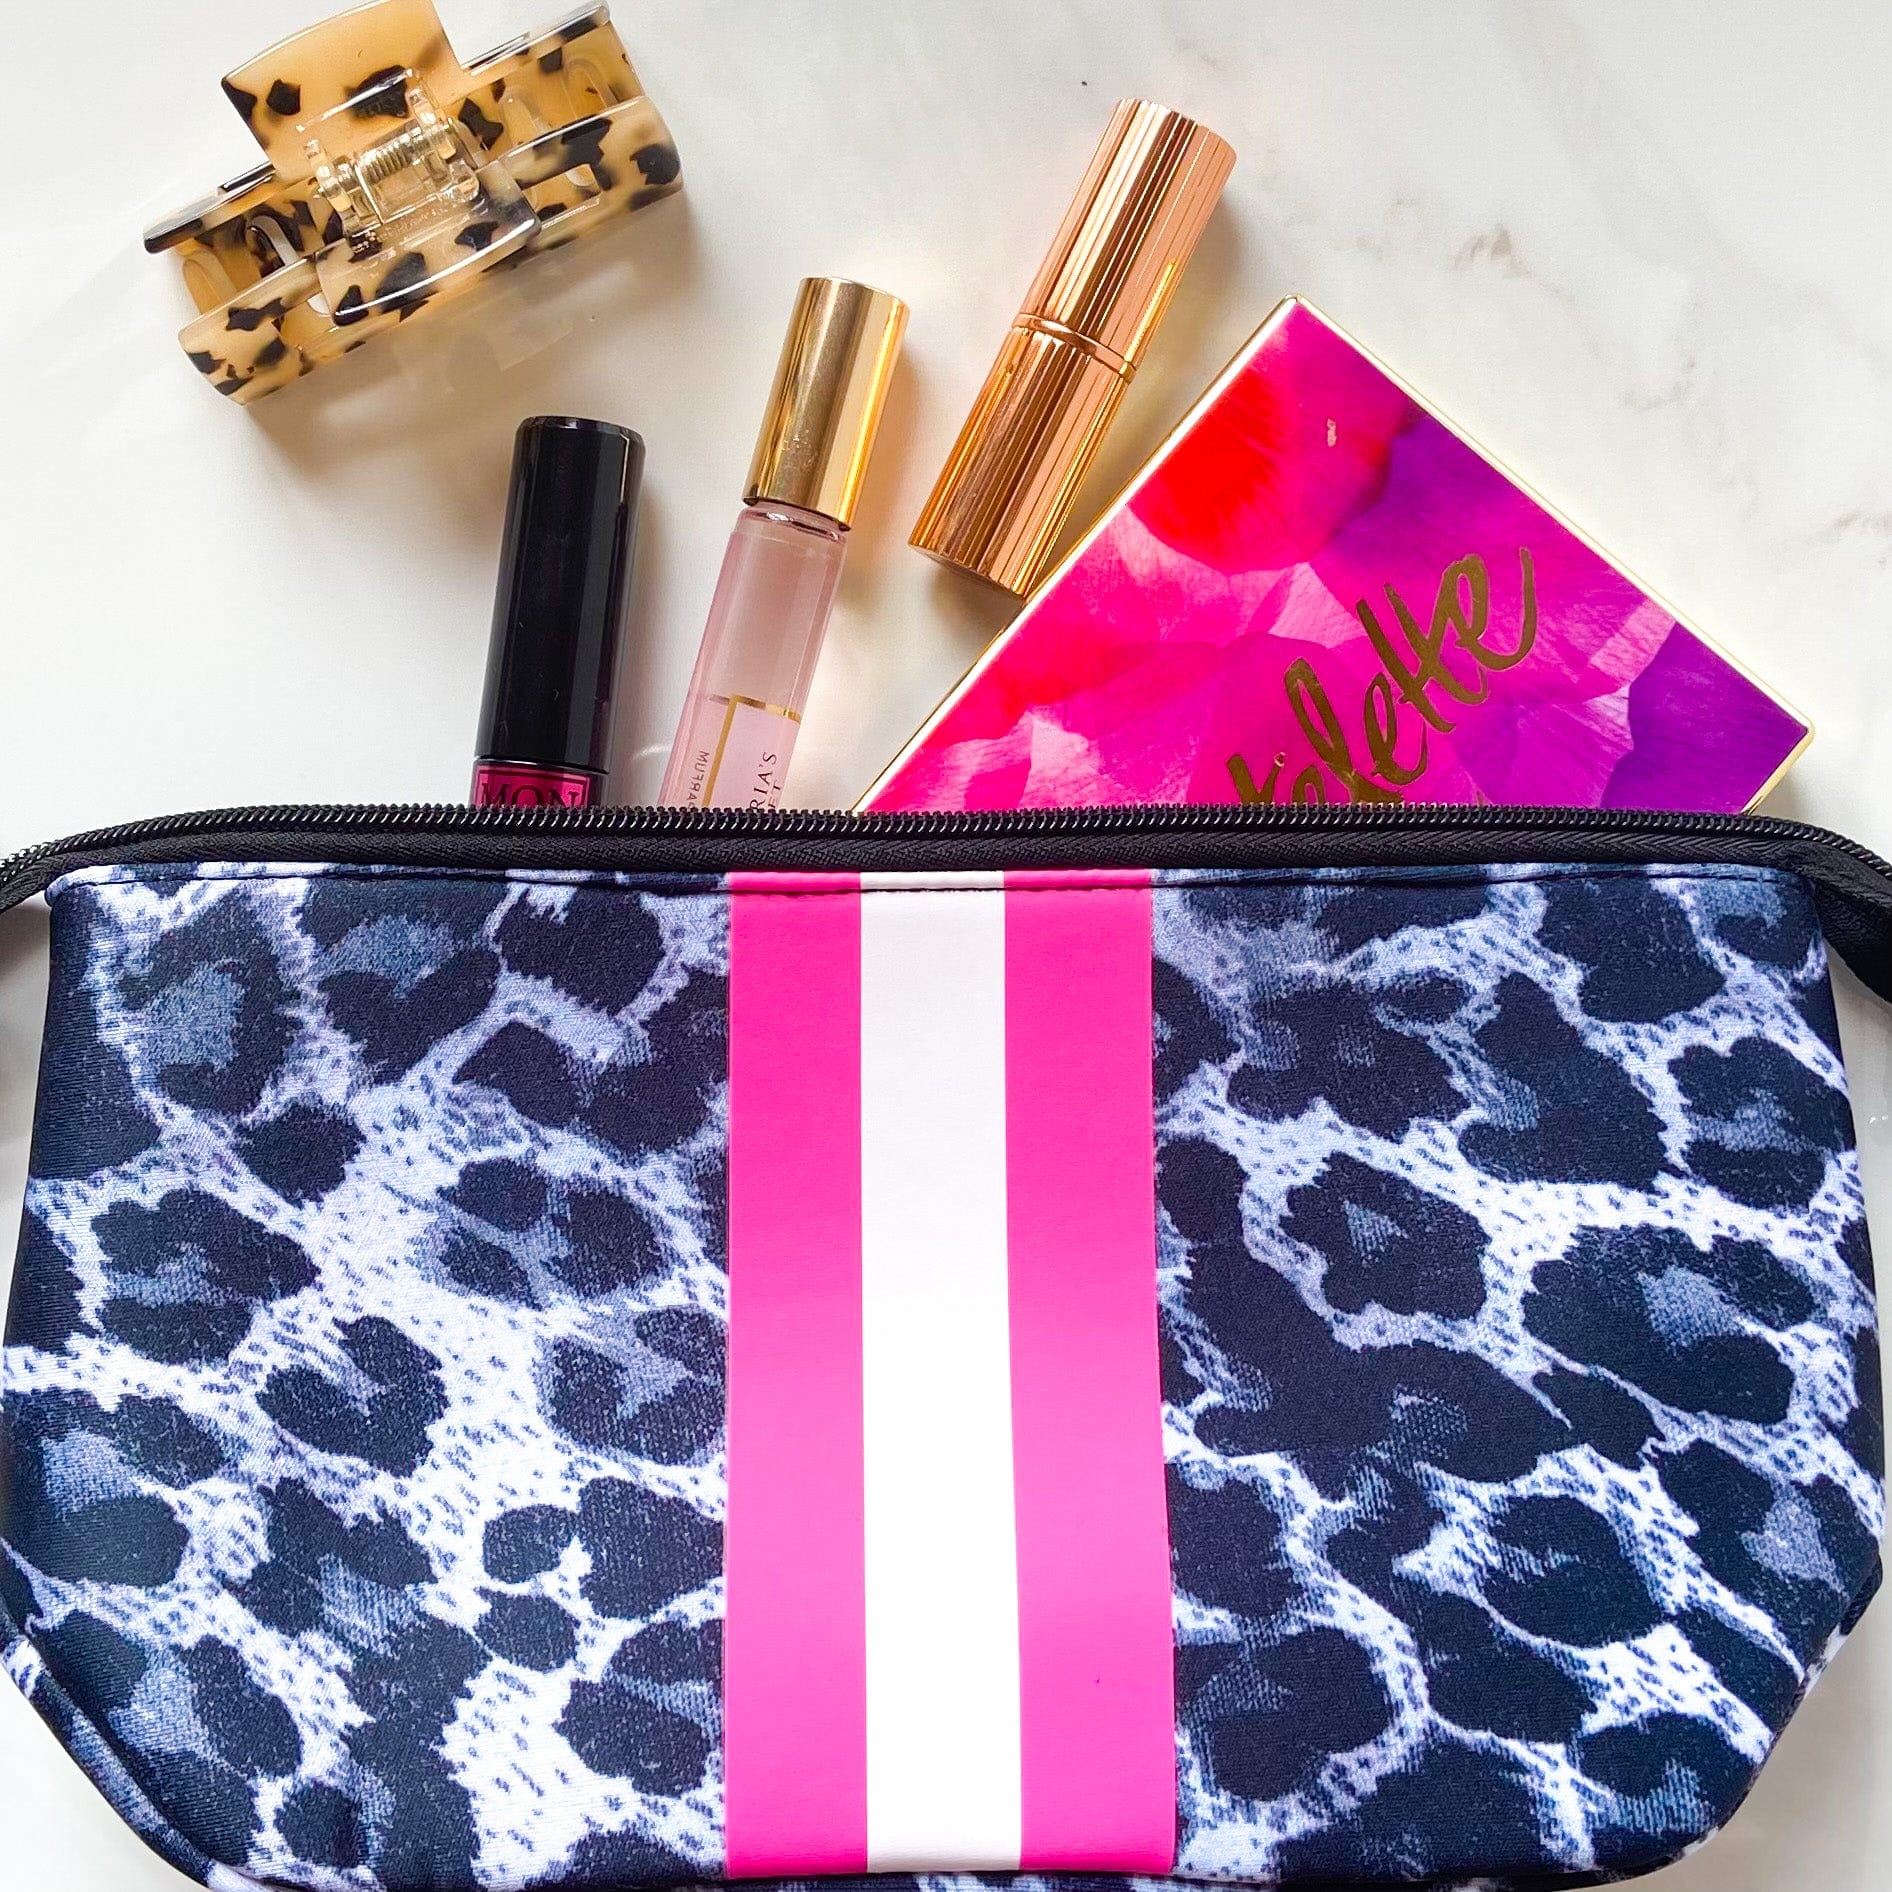 Neoprene makeup bag in white leopard styled with makeup and accessories